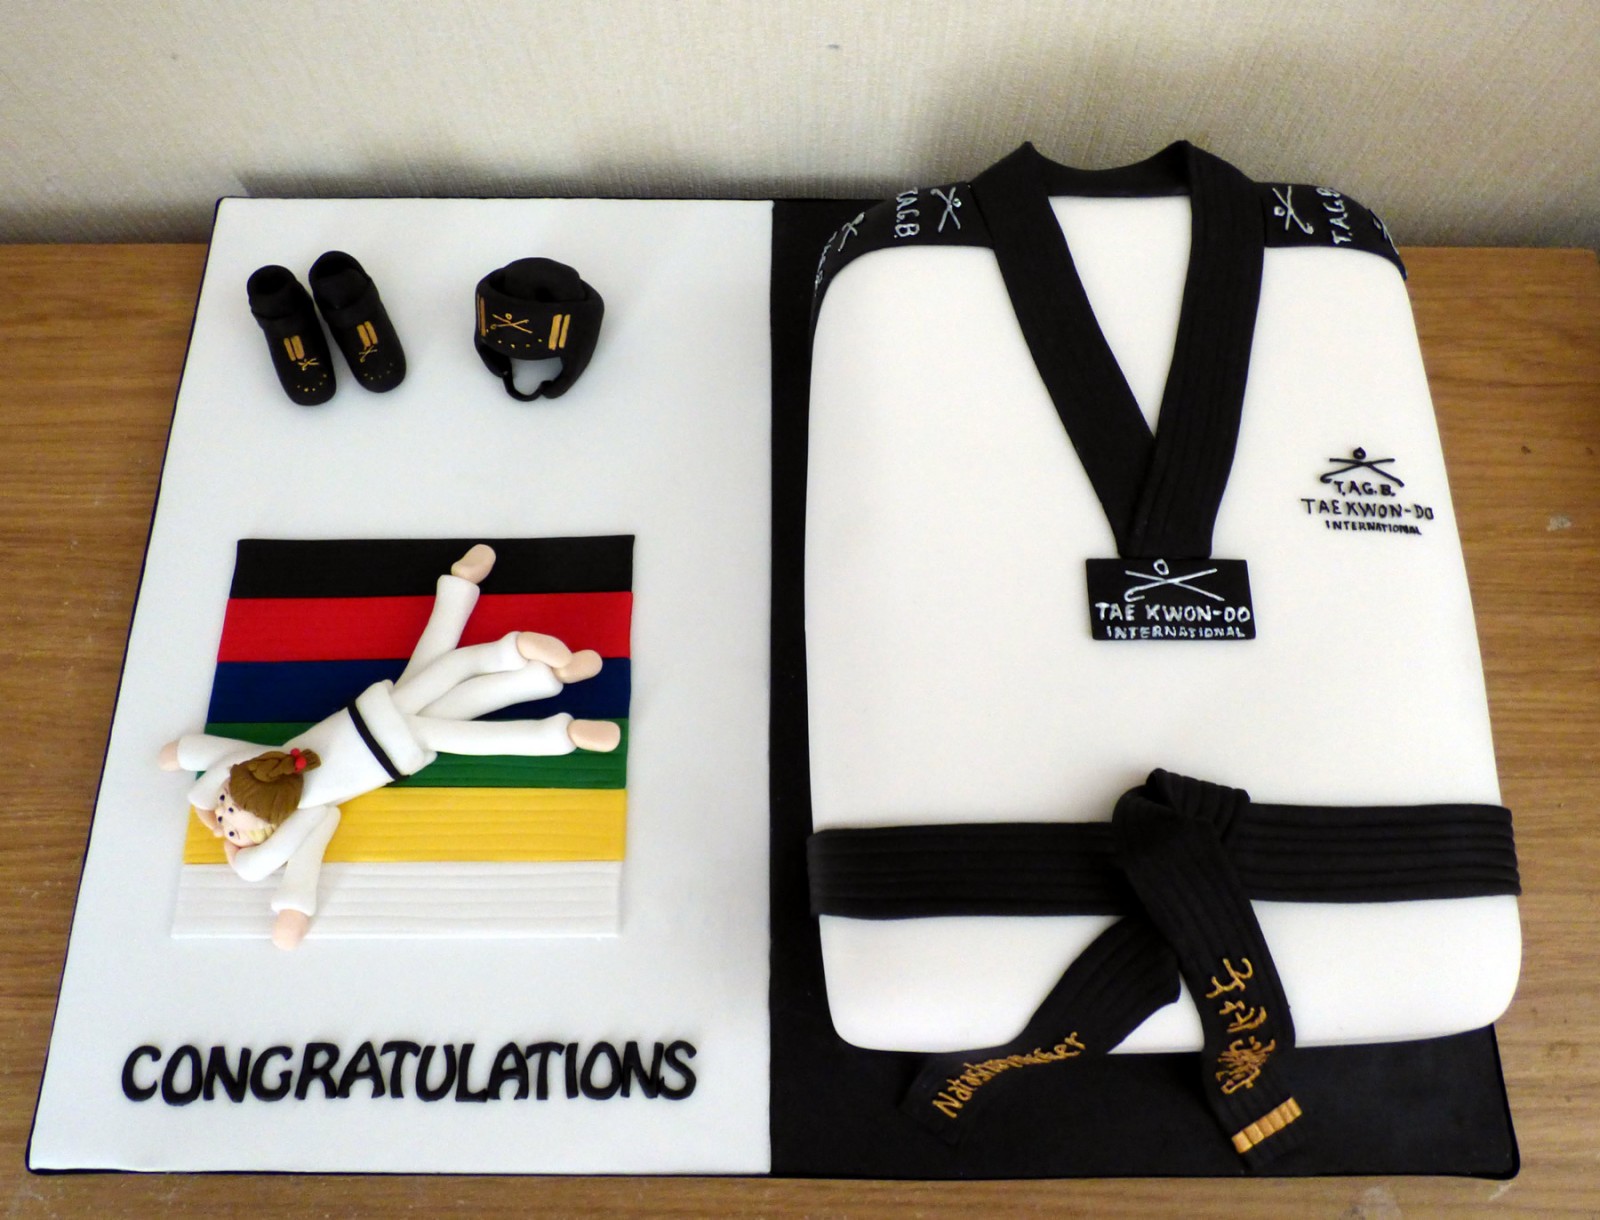 Martial Arts Uniform Cake Inspired By Cherrys Cakes Loved The Simple Design  All Fondant - CakeCentral.com